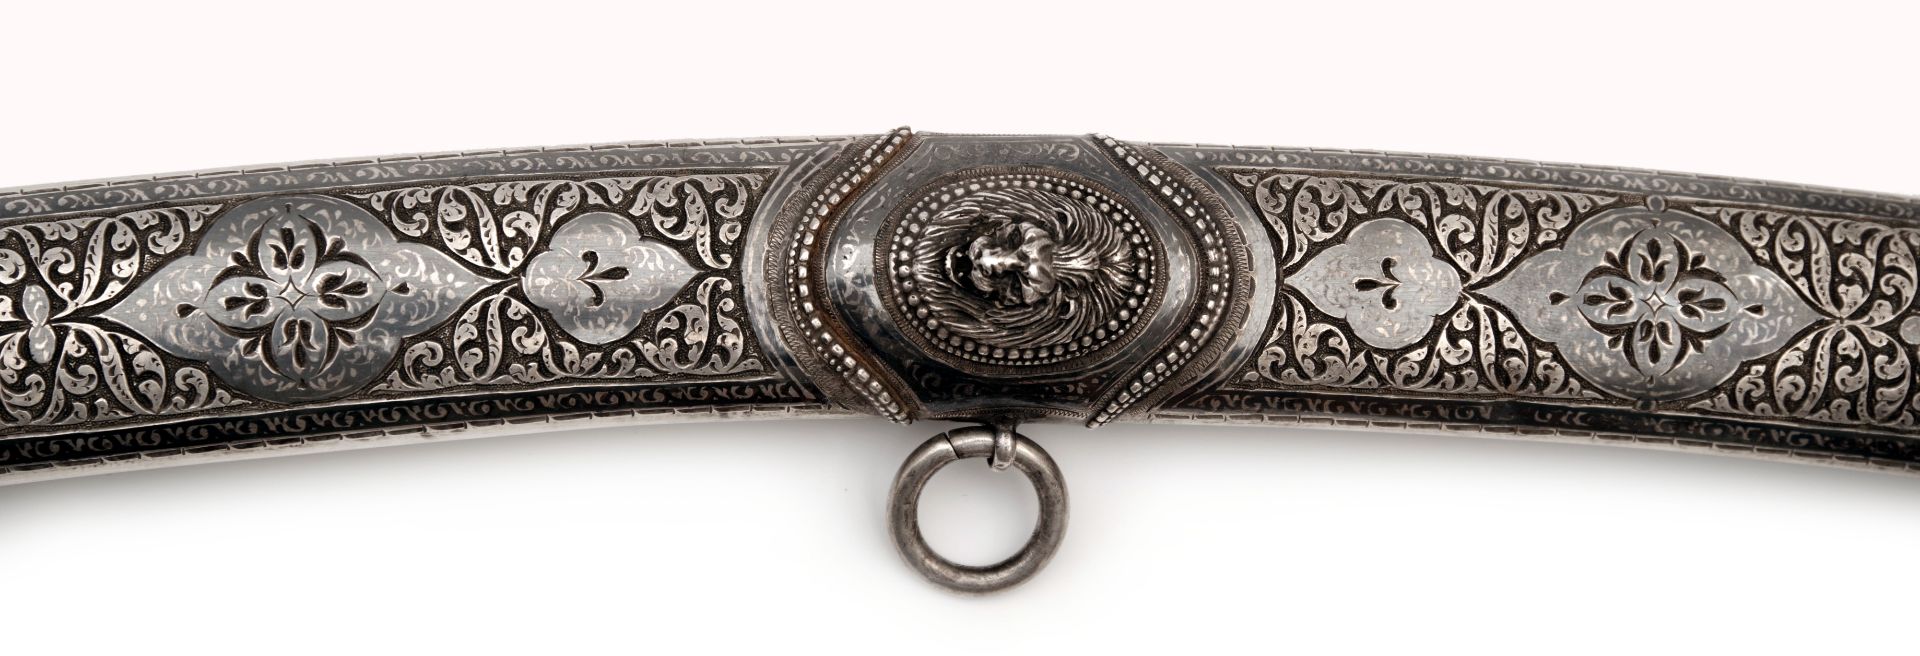 A Fabulous Russian Imperial Presentation Sword in Niello Silver Mounts - Image 3 of 6